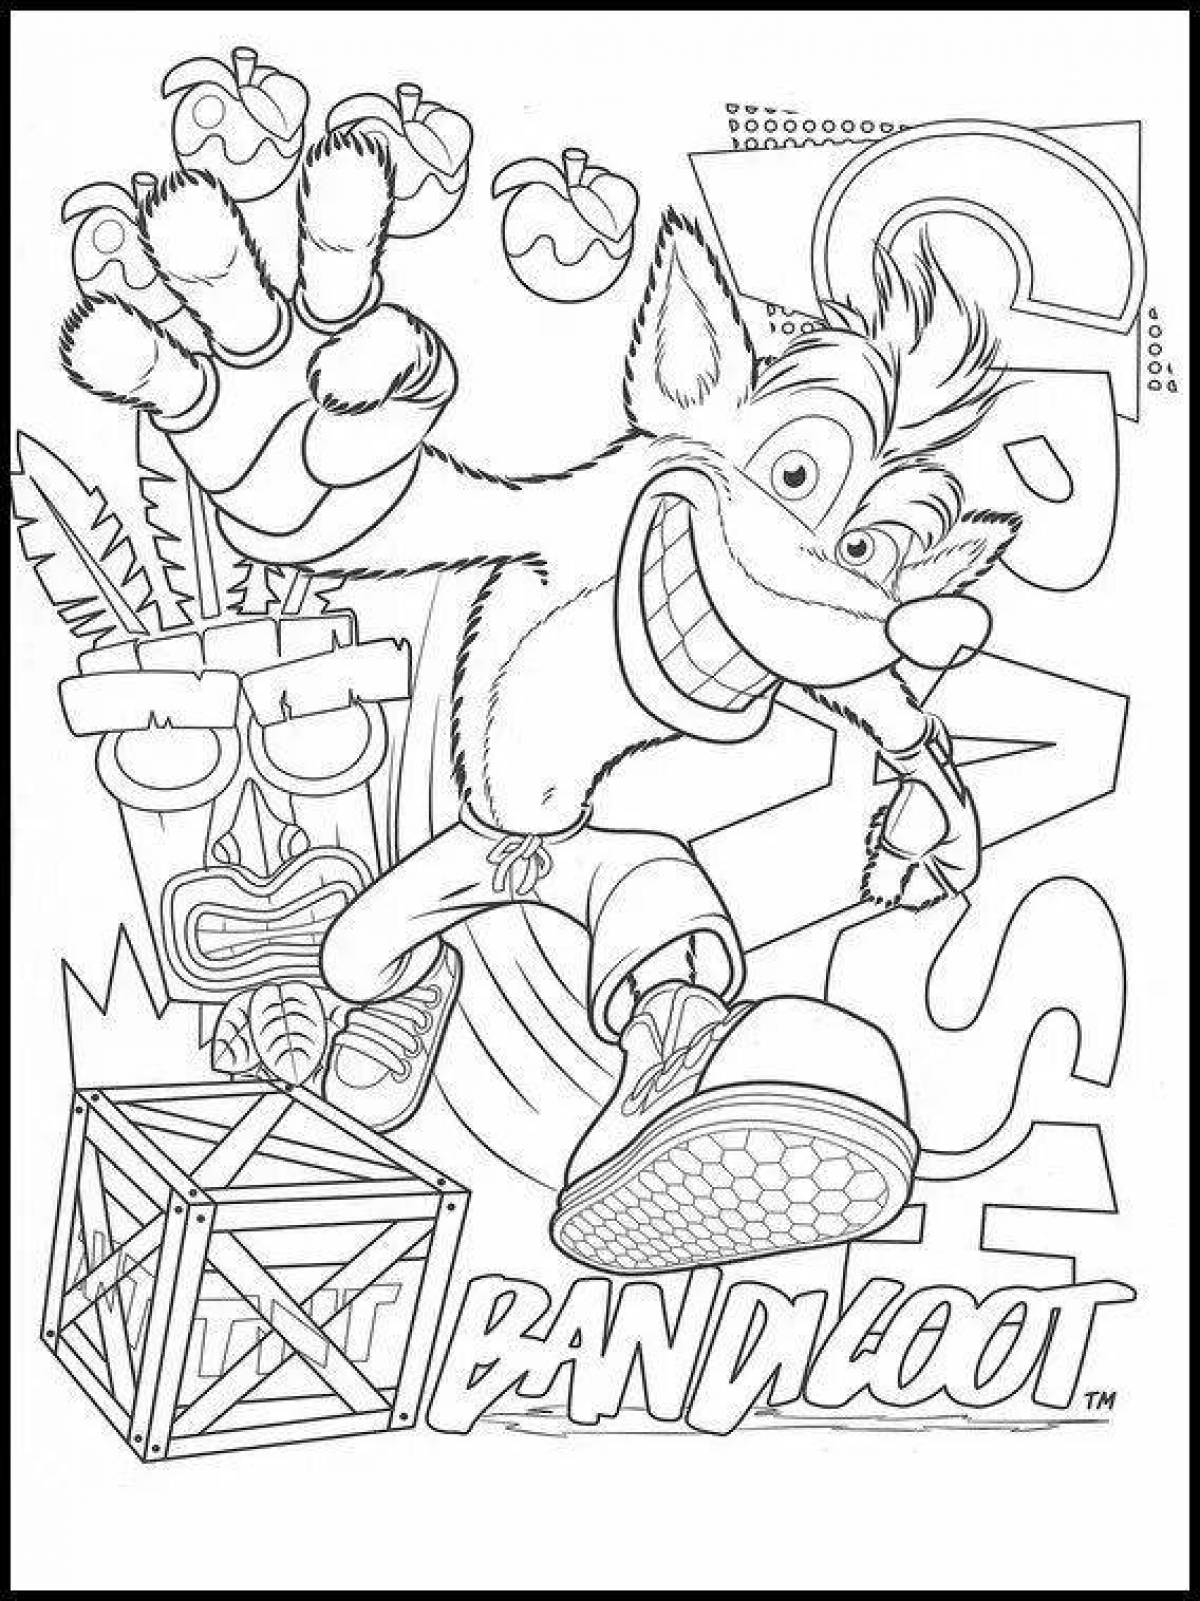 Color-lively crash bandicoot coloring page